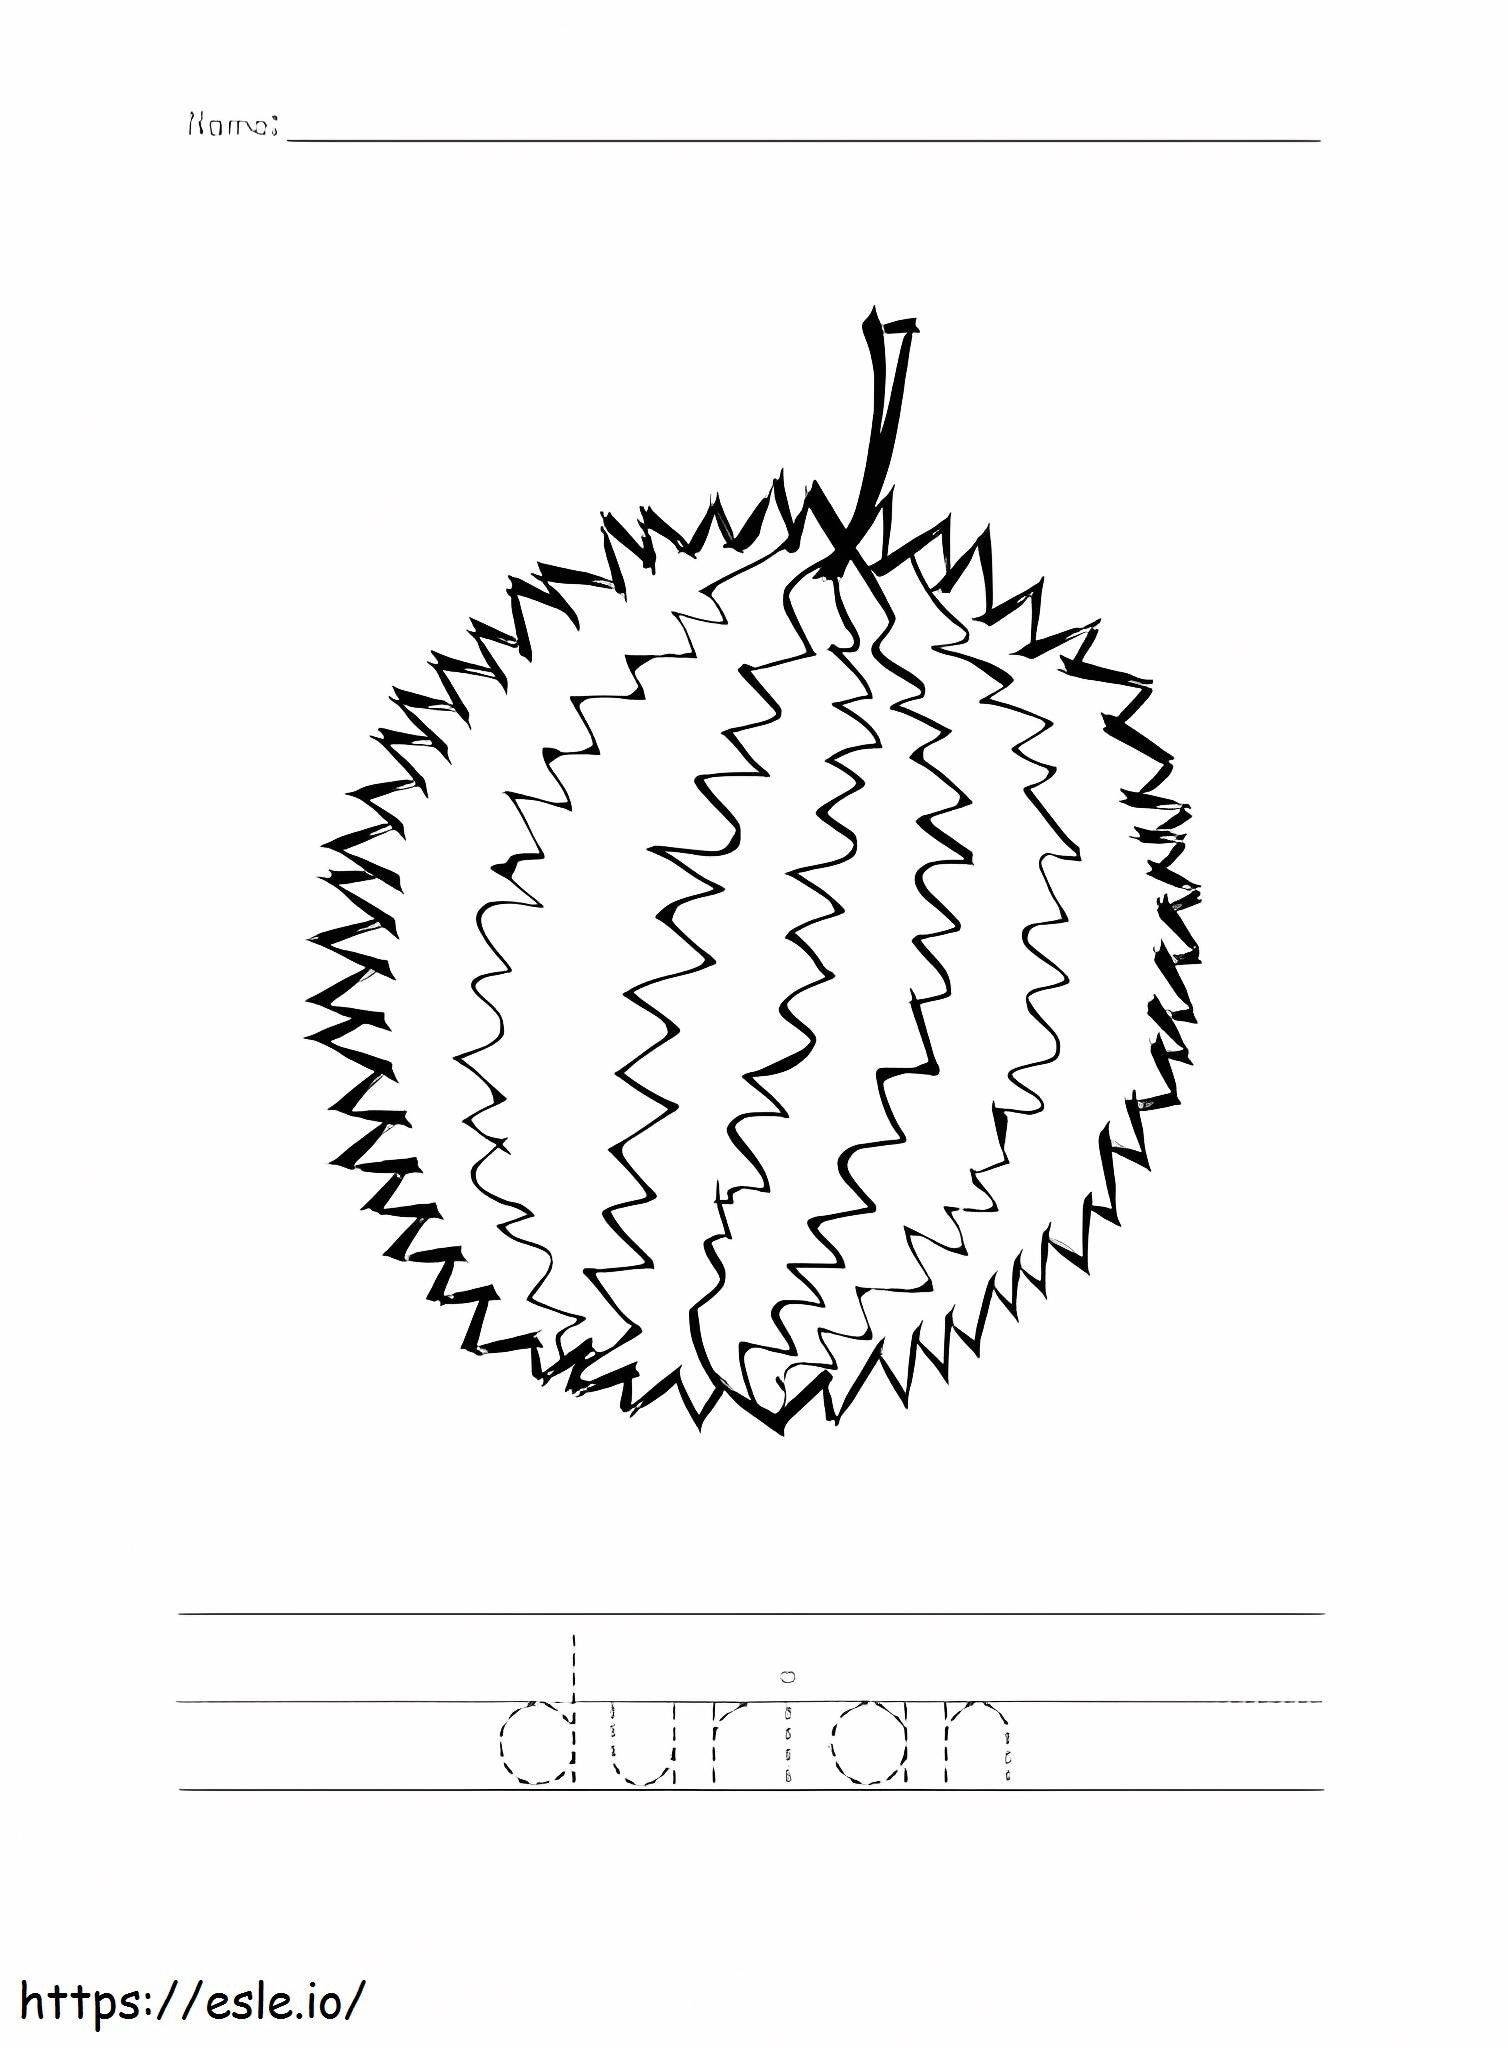 Amazing Durian coloring page